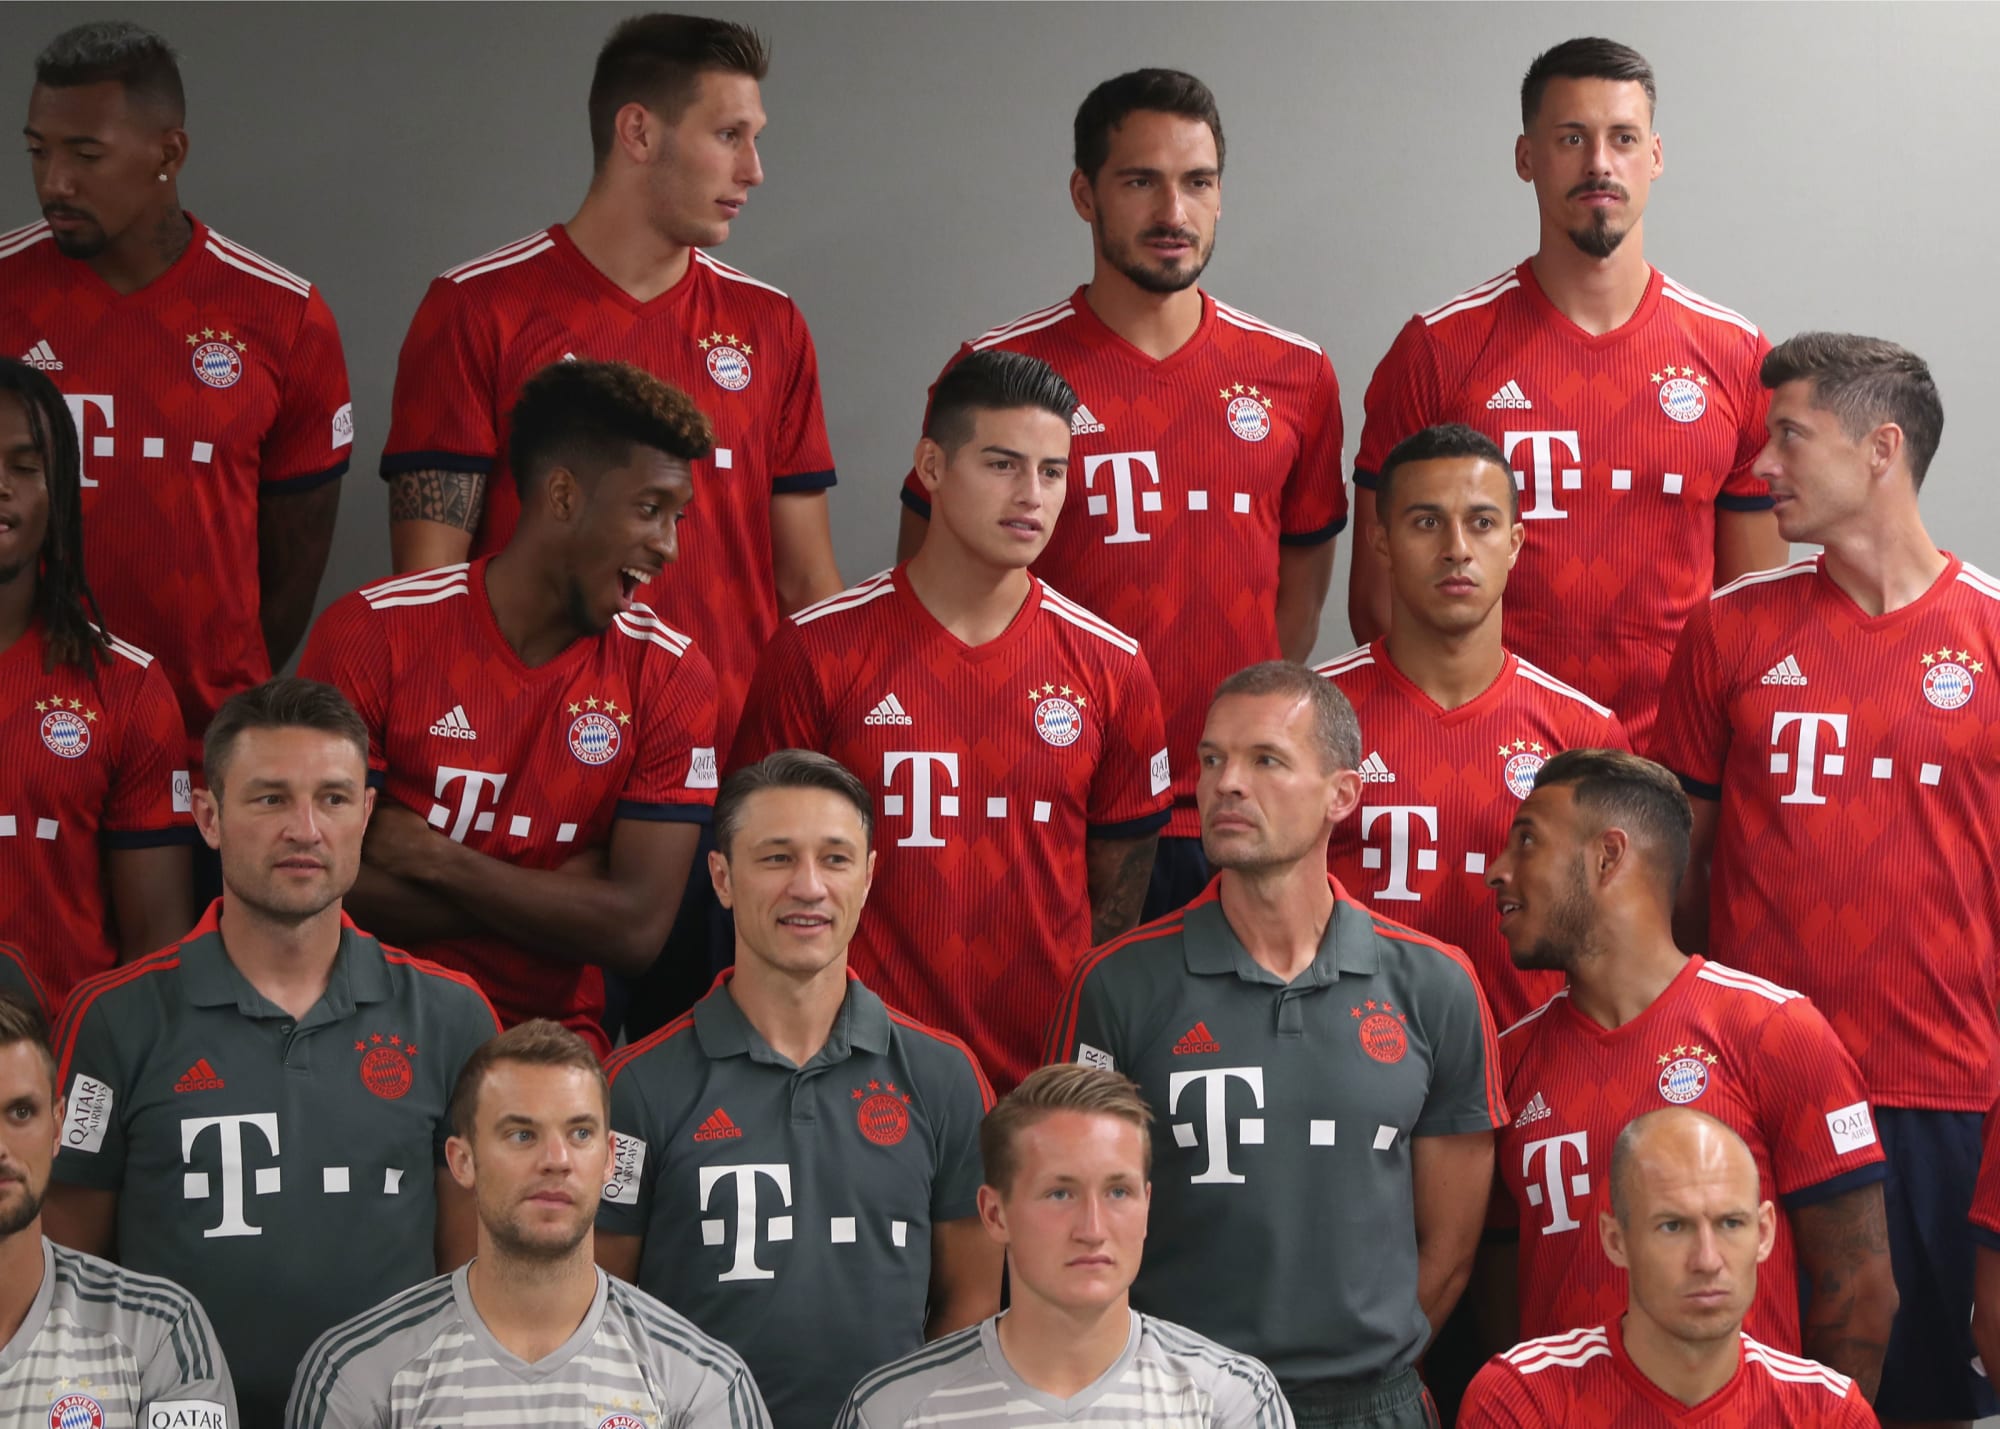 Five Bayern Munich players who could be in for a big season